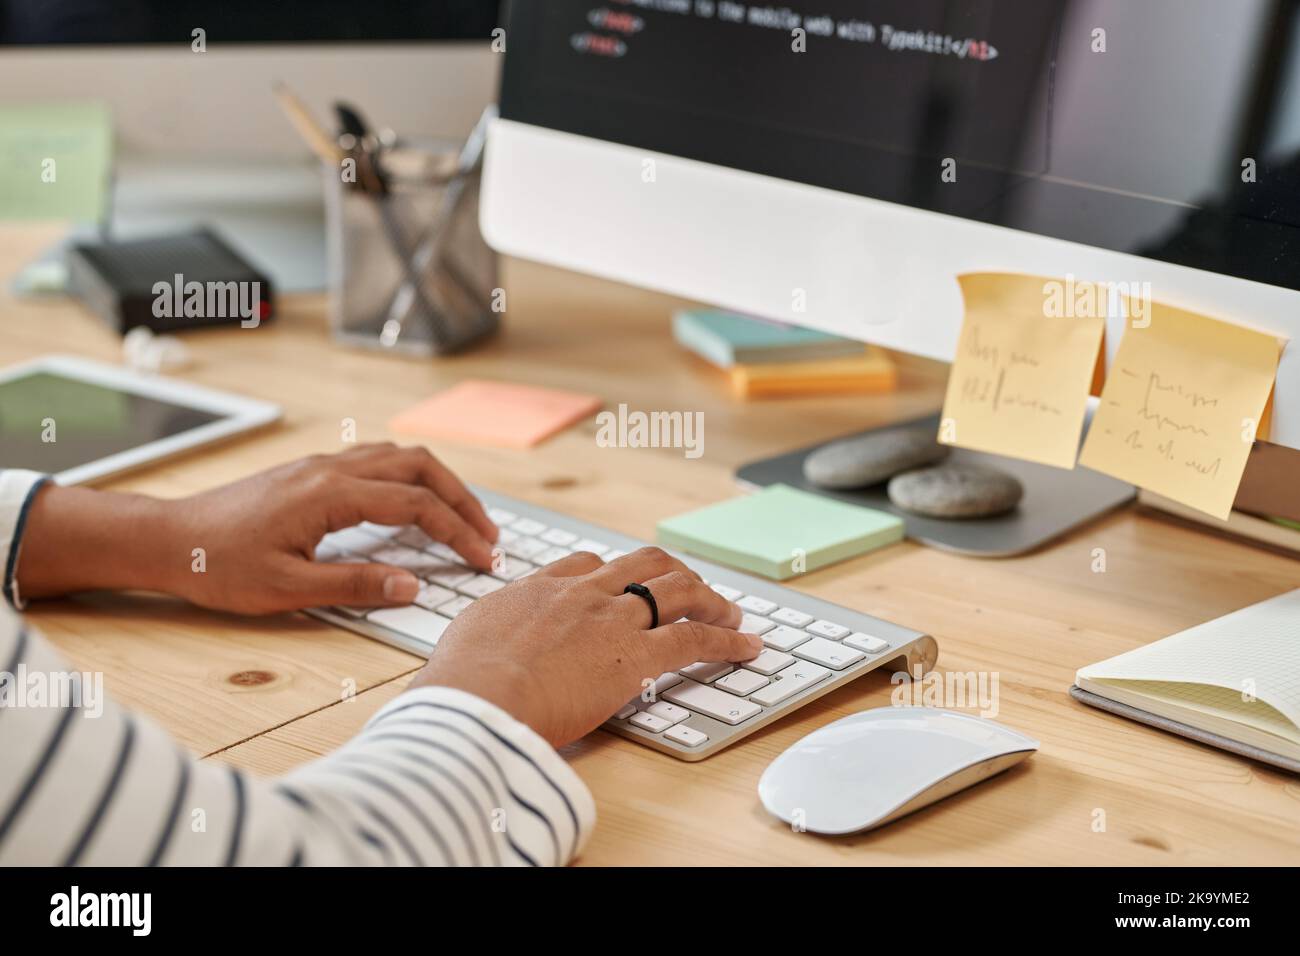 Hands of young woman pressing keys of keyboard while sitting in front of computer monitor and working over development of new software Stock Photo